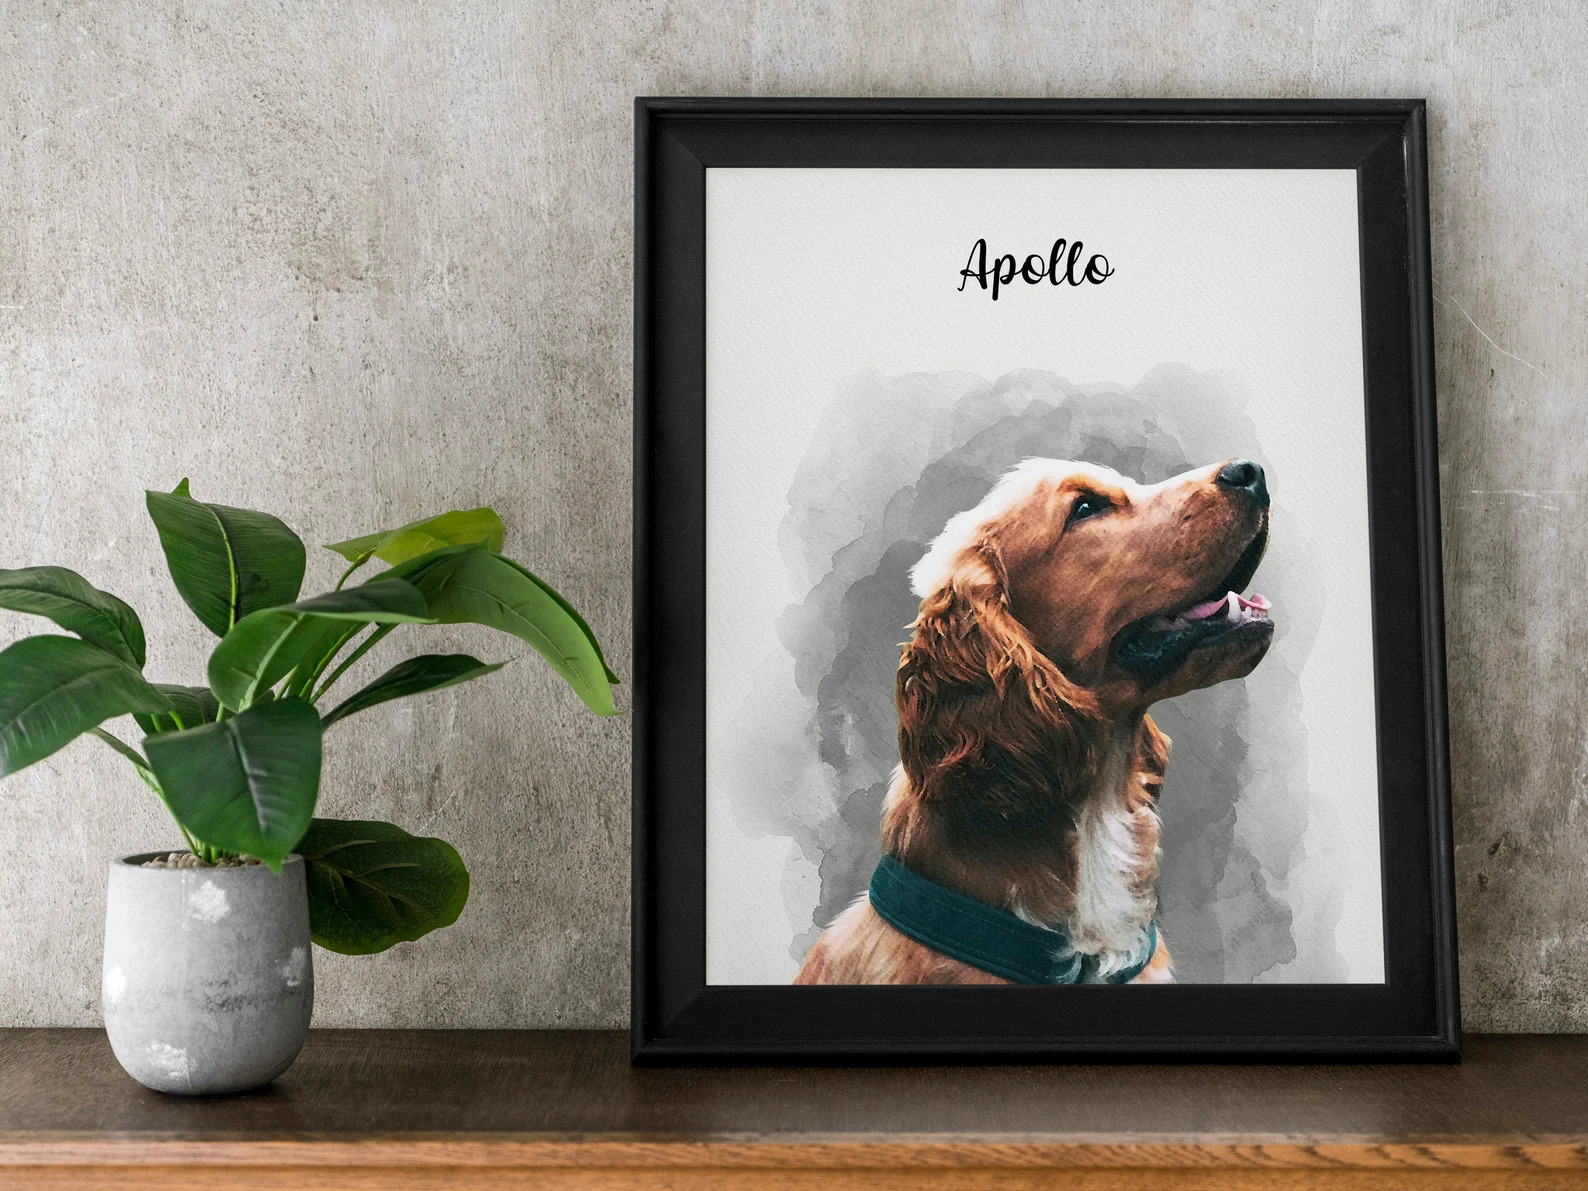 17 Personalized Wall Art Designs That Will Make Your Home Unique